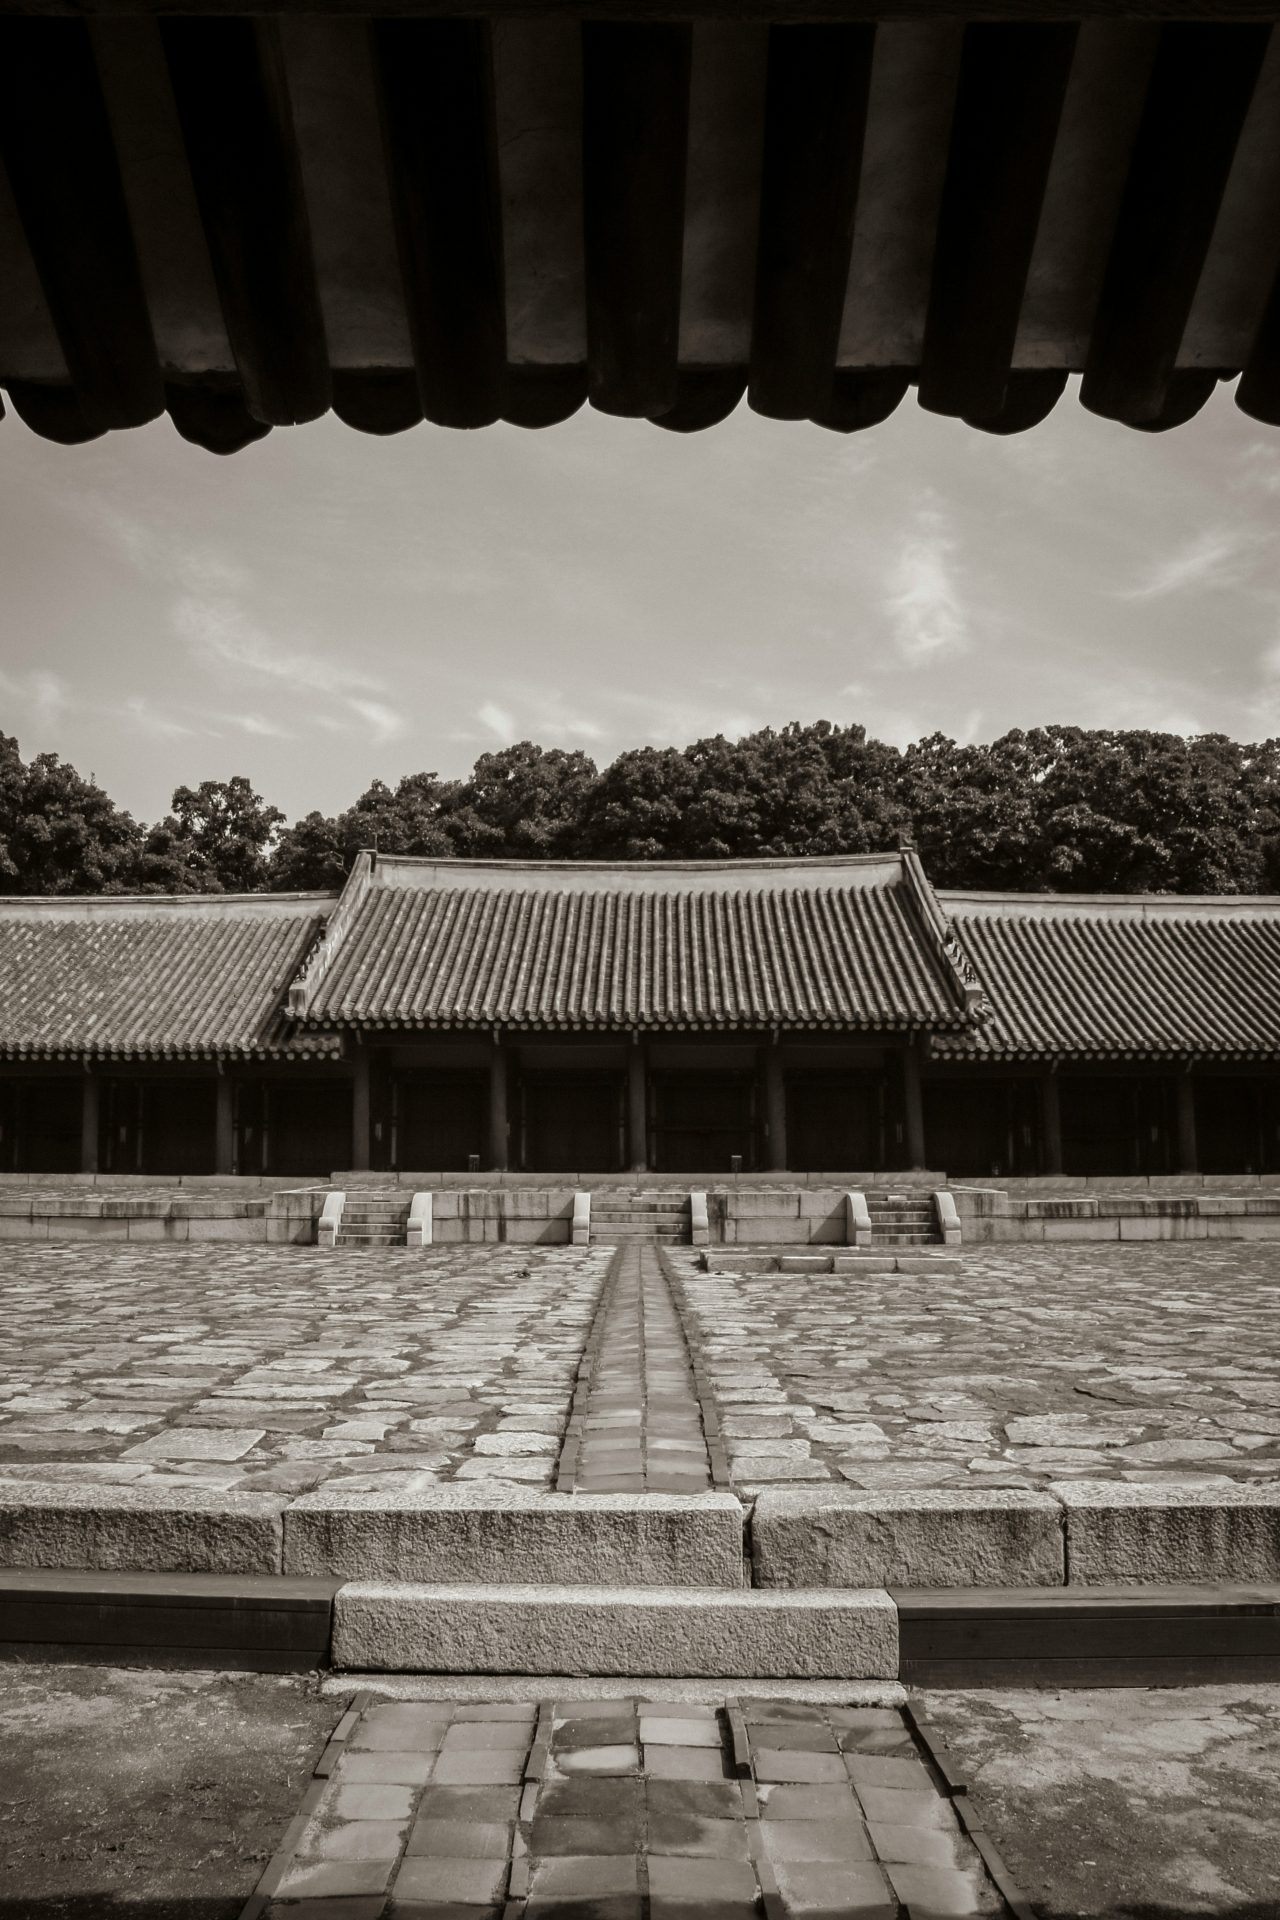 <p>Jongmyo Shrine is also a World Heritage Site, and the Jongmyo Festival held every May is also designated as an intangible heritage by UNESCO as the world's oldest ritual culture with a history of 500 years.</p> <p>Image: Hanvin Cheong / Unsplash</p>